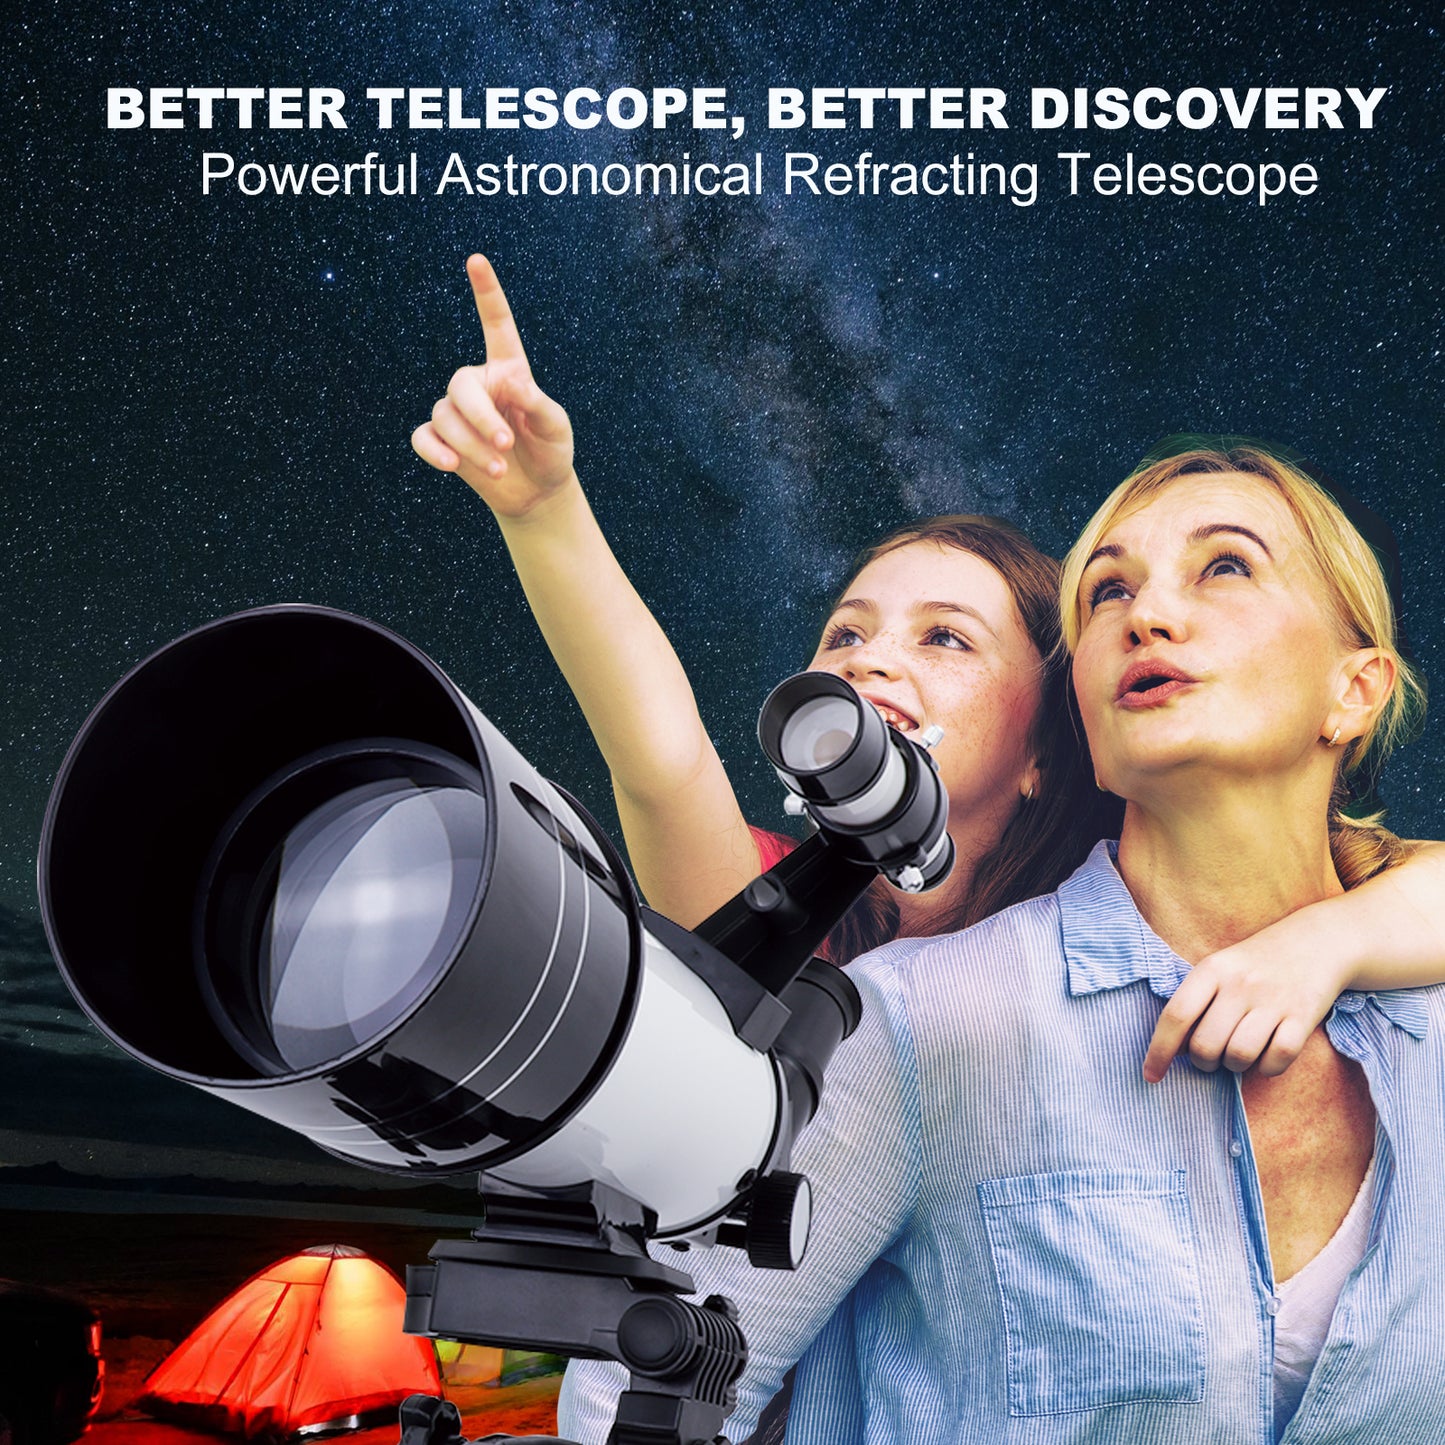 BNISE Telescope With Phone Adapter,70mm HD Aperture Refractor 400mm ,Space Telescop for Adults Kids,Telescopes for Astronomy Beginner With Carry Bag Tripod For Viewing Panets, Astronomy Gifts